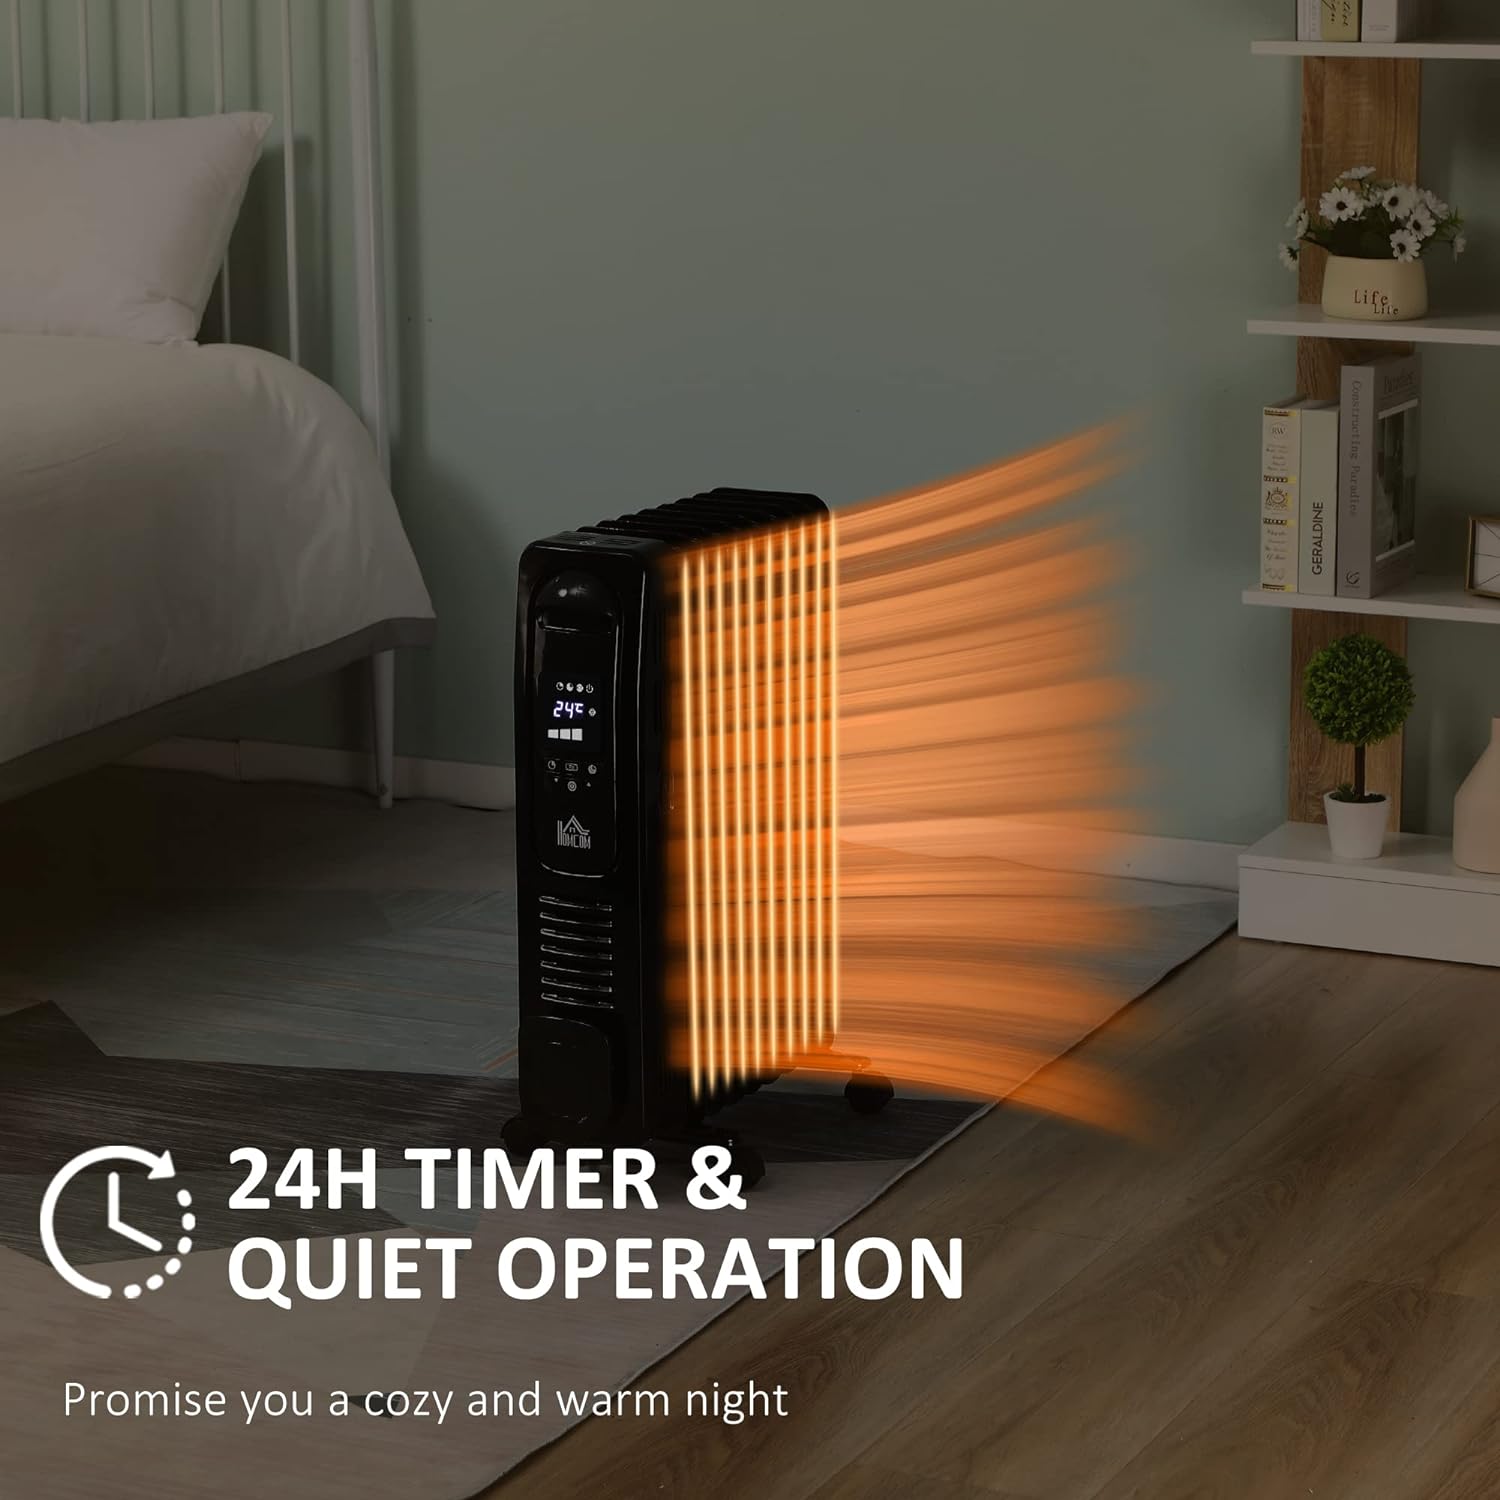 Maplin 2180W Digital 9 Fin Portable Electric Oil Filled Radiator with LED Display, Timer, 3 Heat Settings, Safety Cut-Off & Remote Control - maplin.co.uk